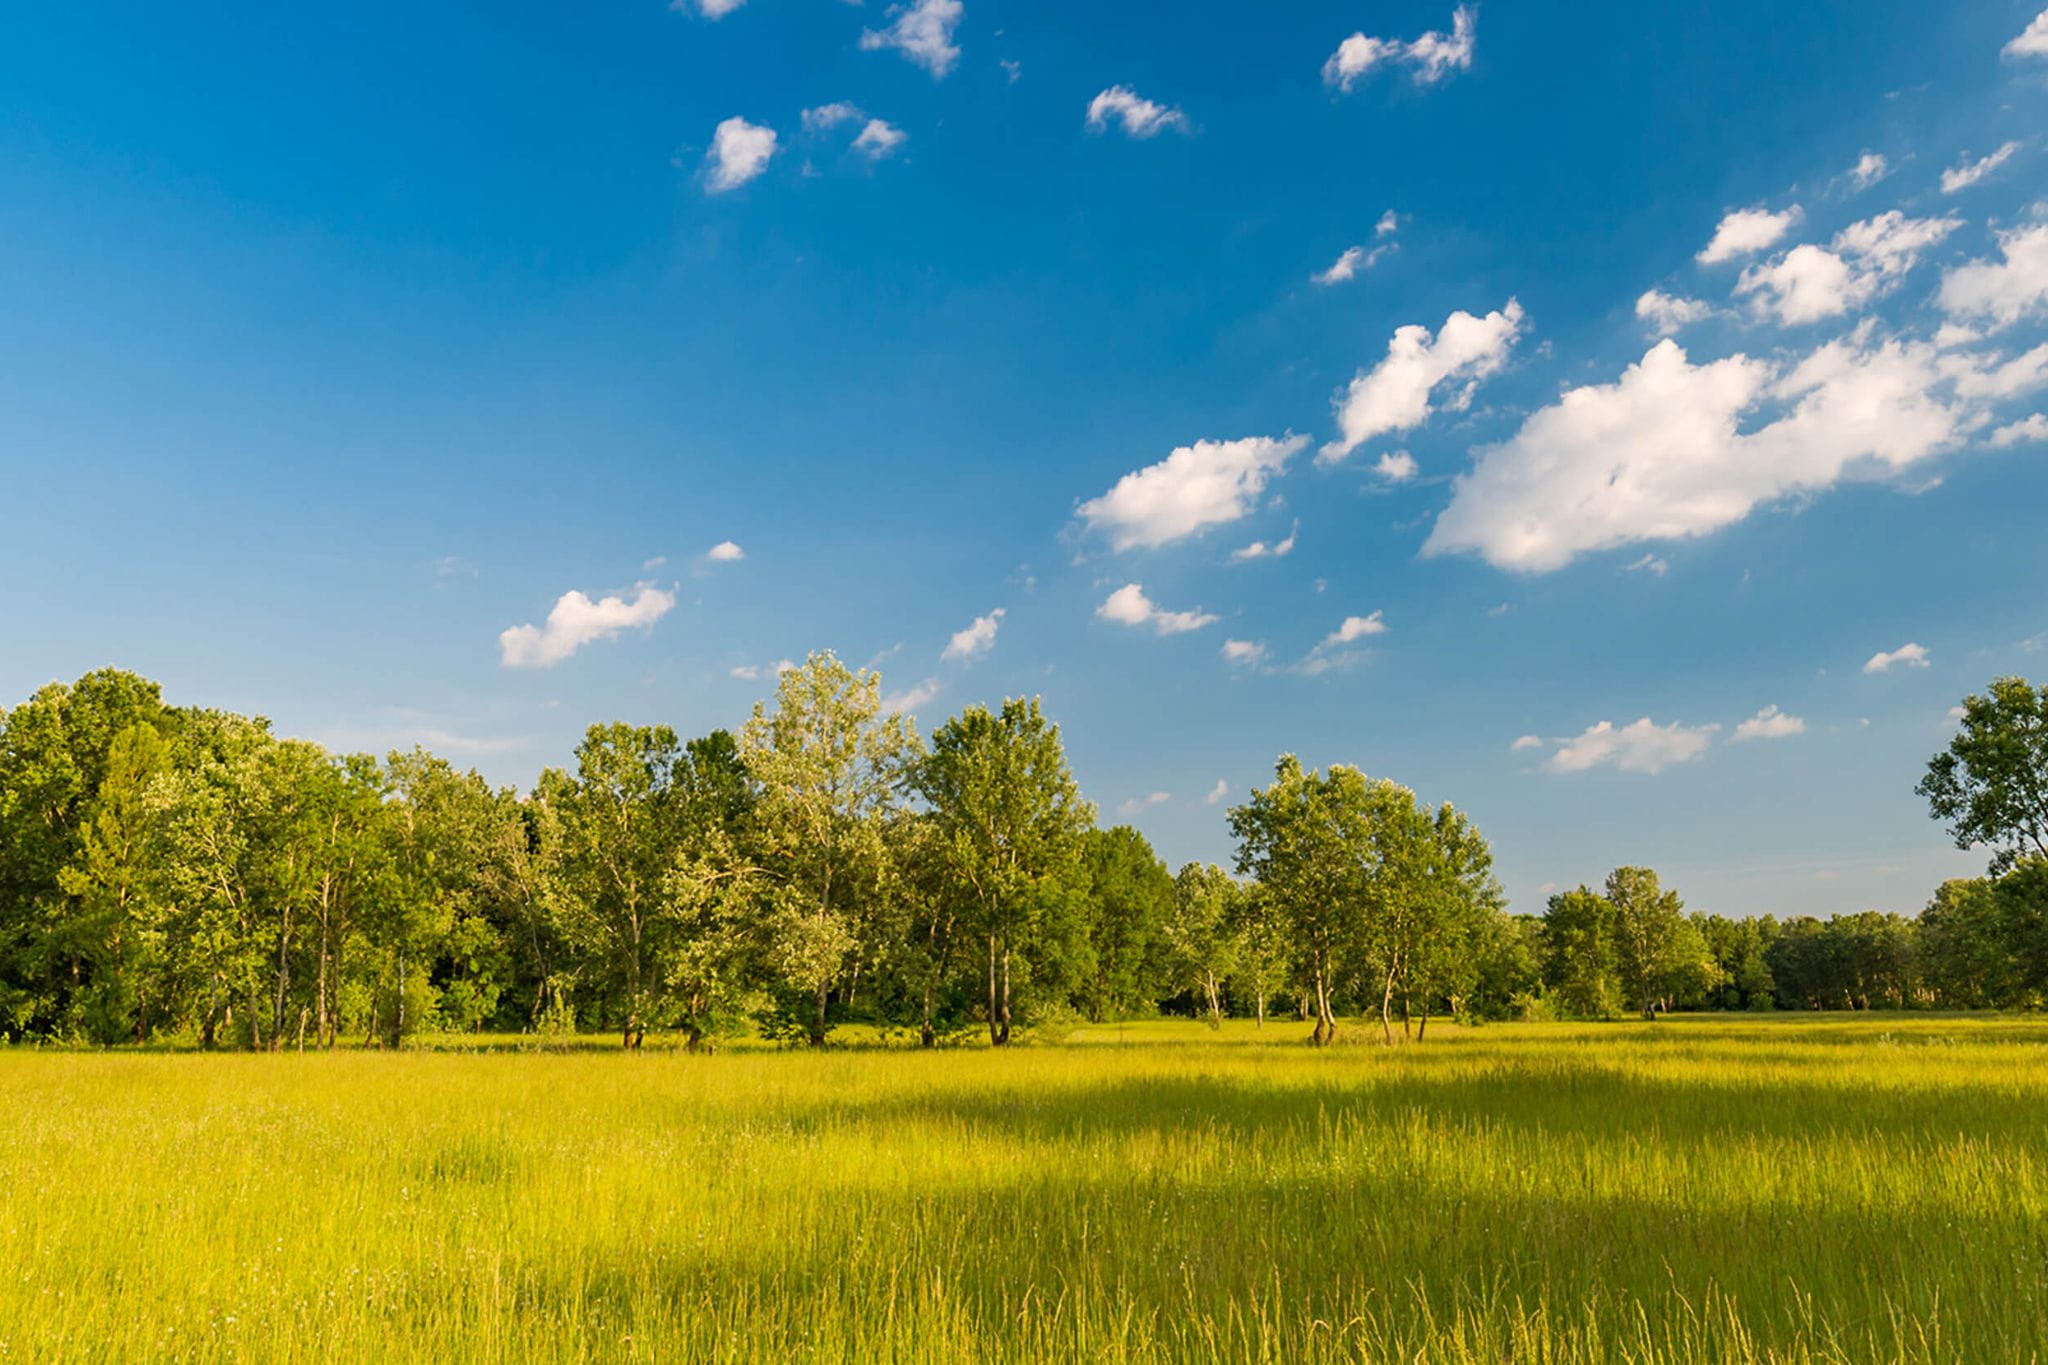 Open plain photo of grass and trees